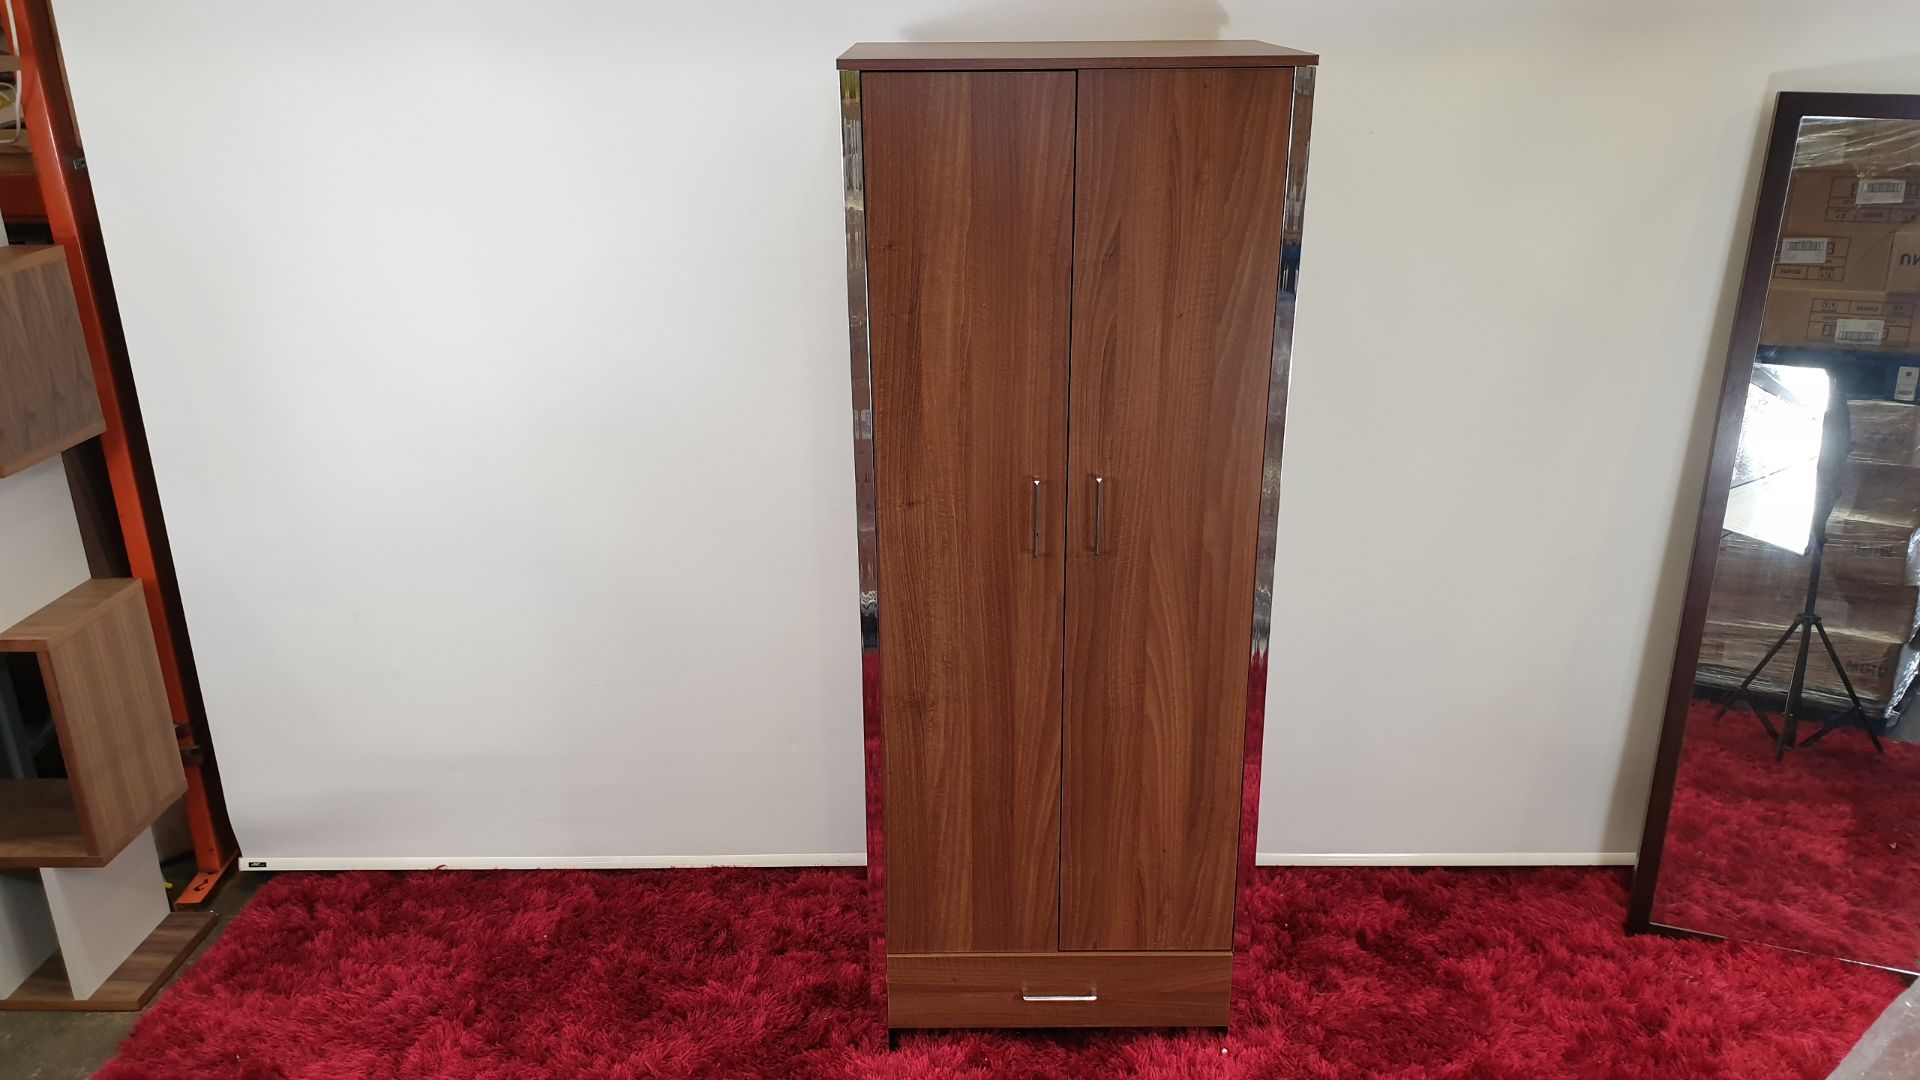 4 X BROWN 2 DOOR 1 ROBE WITH SILVER EDGE WARDROBES - BRAND NEW AND BOXED